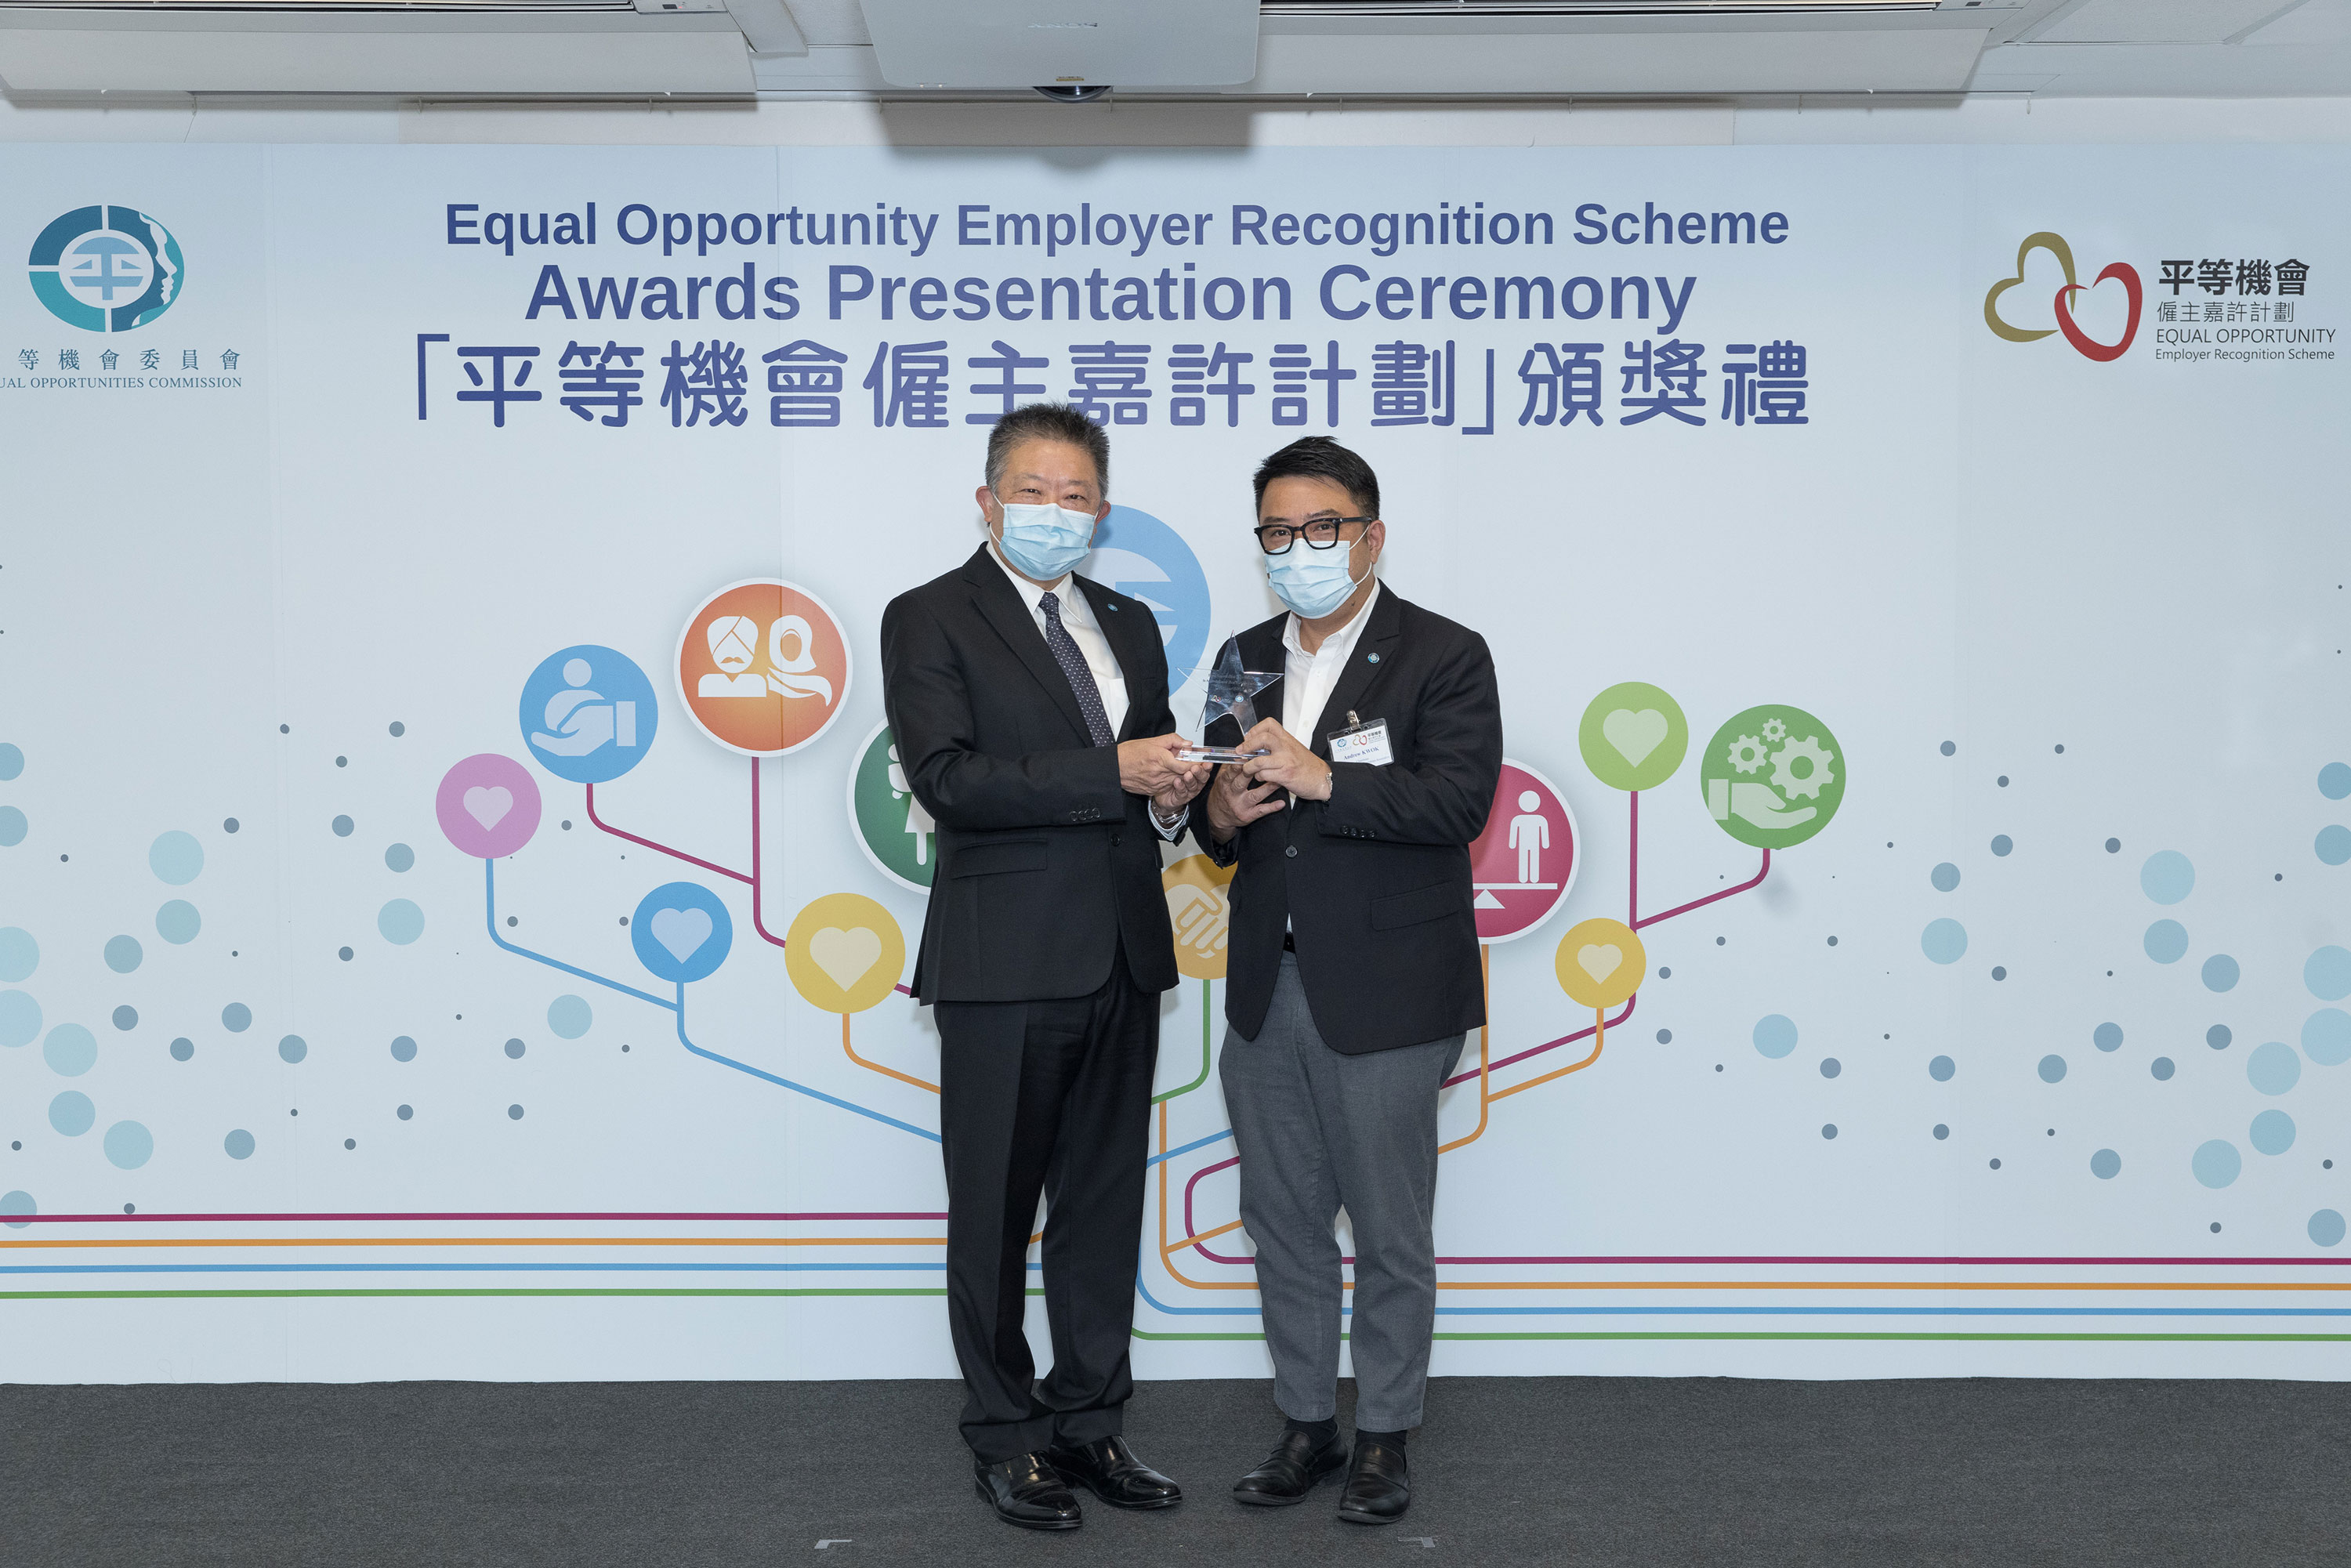 Mr Ricky CHU Man-kin, IDS, Chairperson of the Equal Opportunities Commission (left) presents souvenir to Chairman of the Hong Kong Small and Medium Enterprises Association Mr Andrew KWOK, (right), who served as member of the assessment panel of the Equal Opportunity Employer Recognition Scheme.